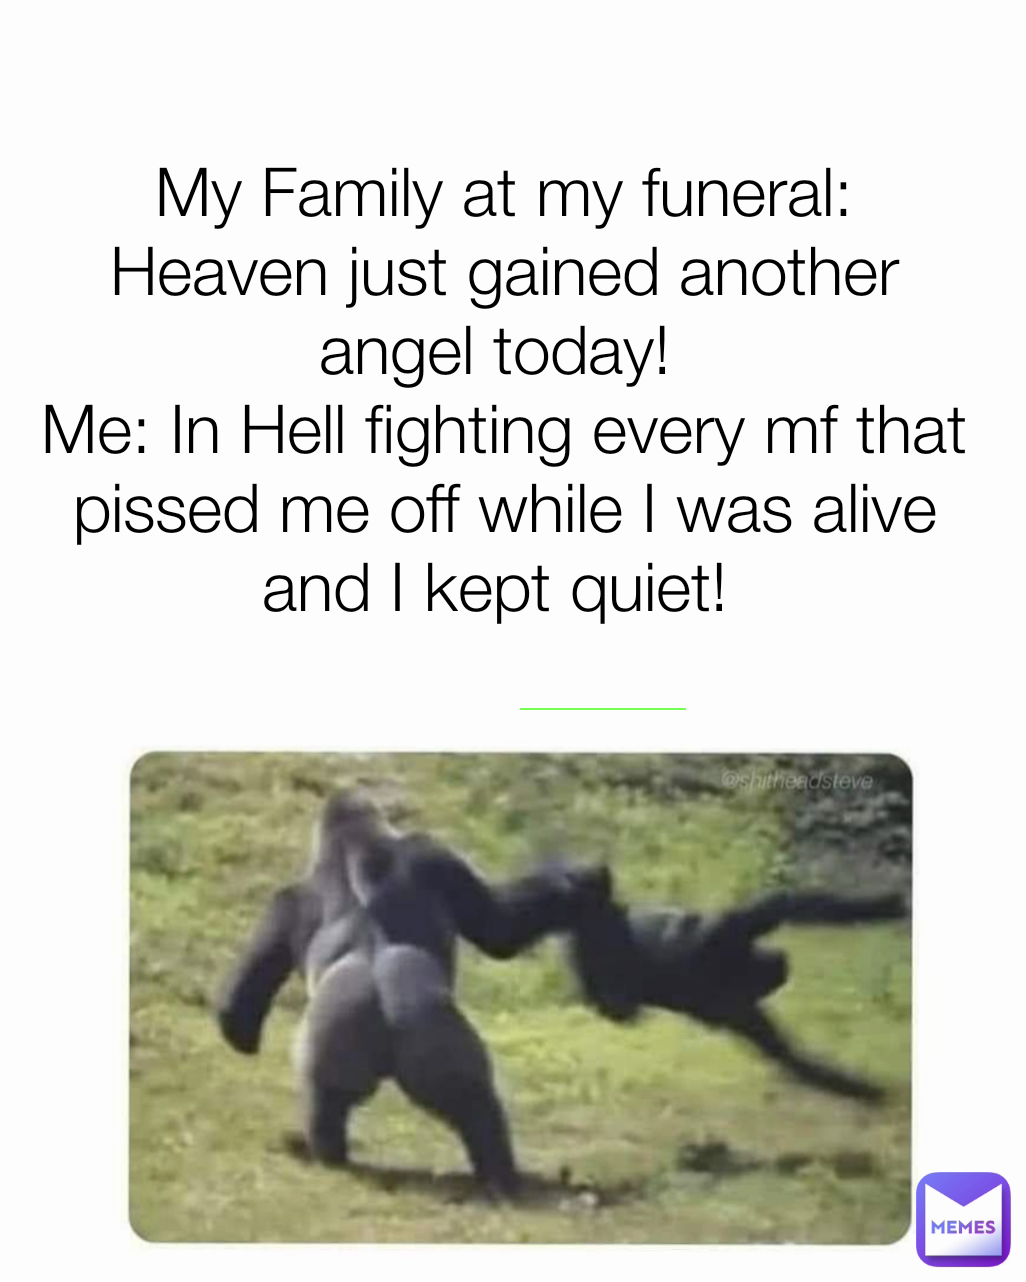 My Family at my funeral: Heaven just gained another angel today! 
Me: In Hell fighting every mf that pissed me off while I was alive and I kept quiet! 